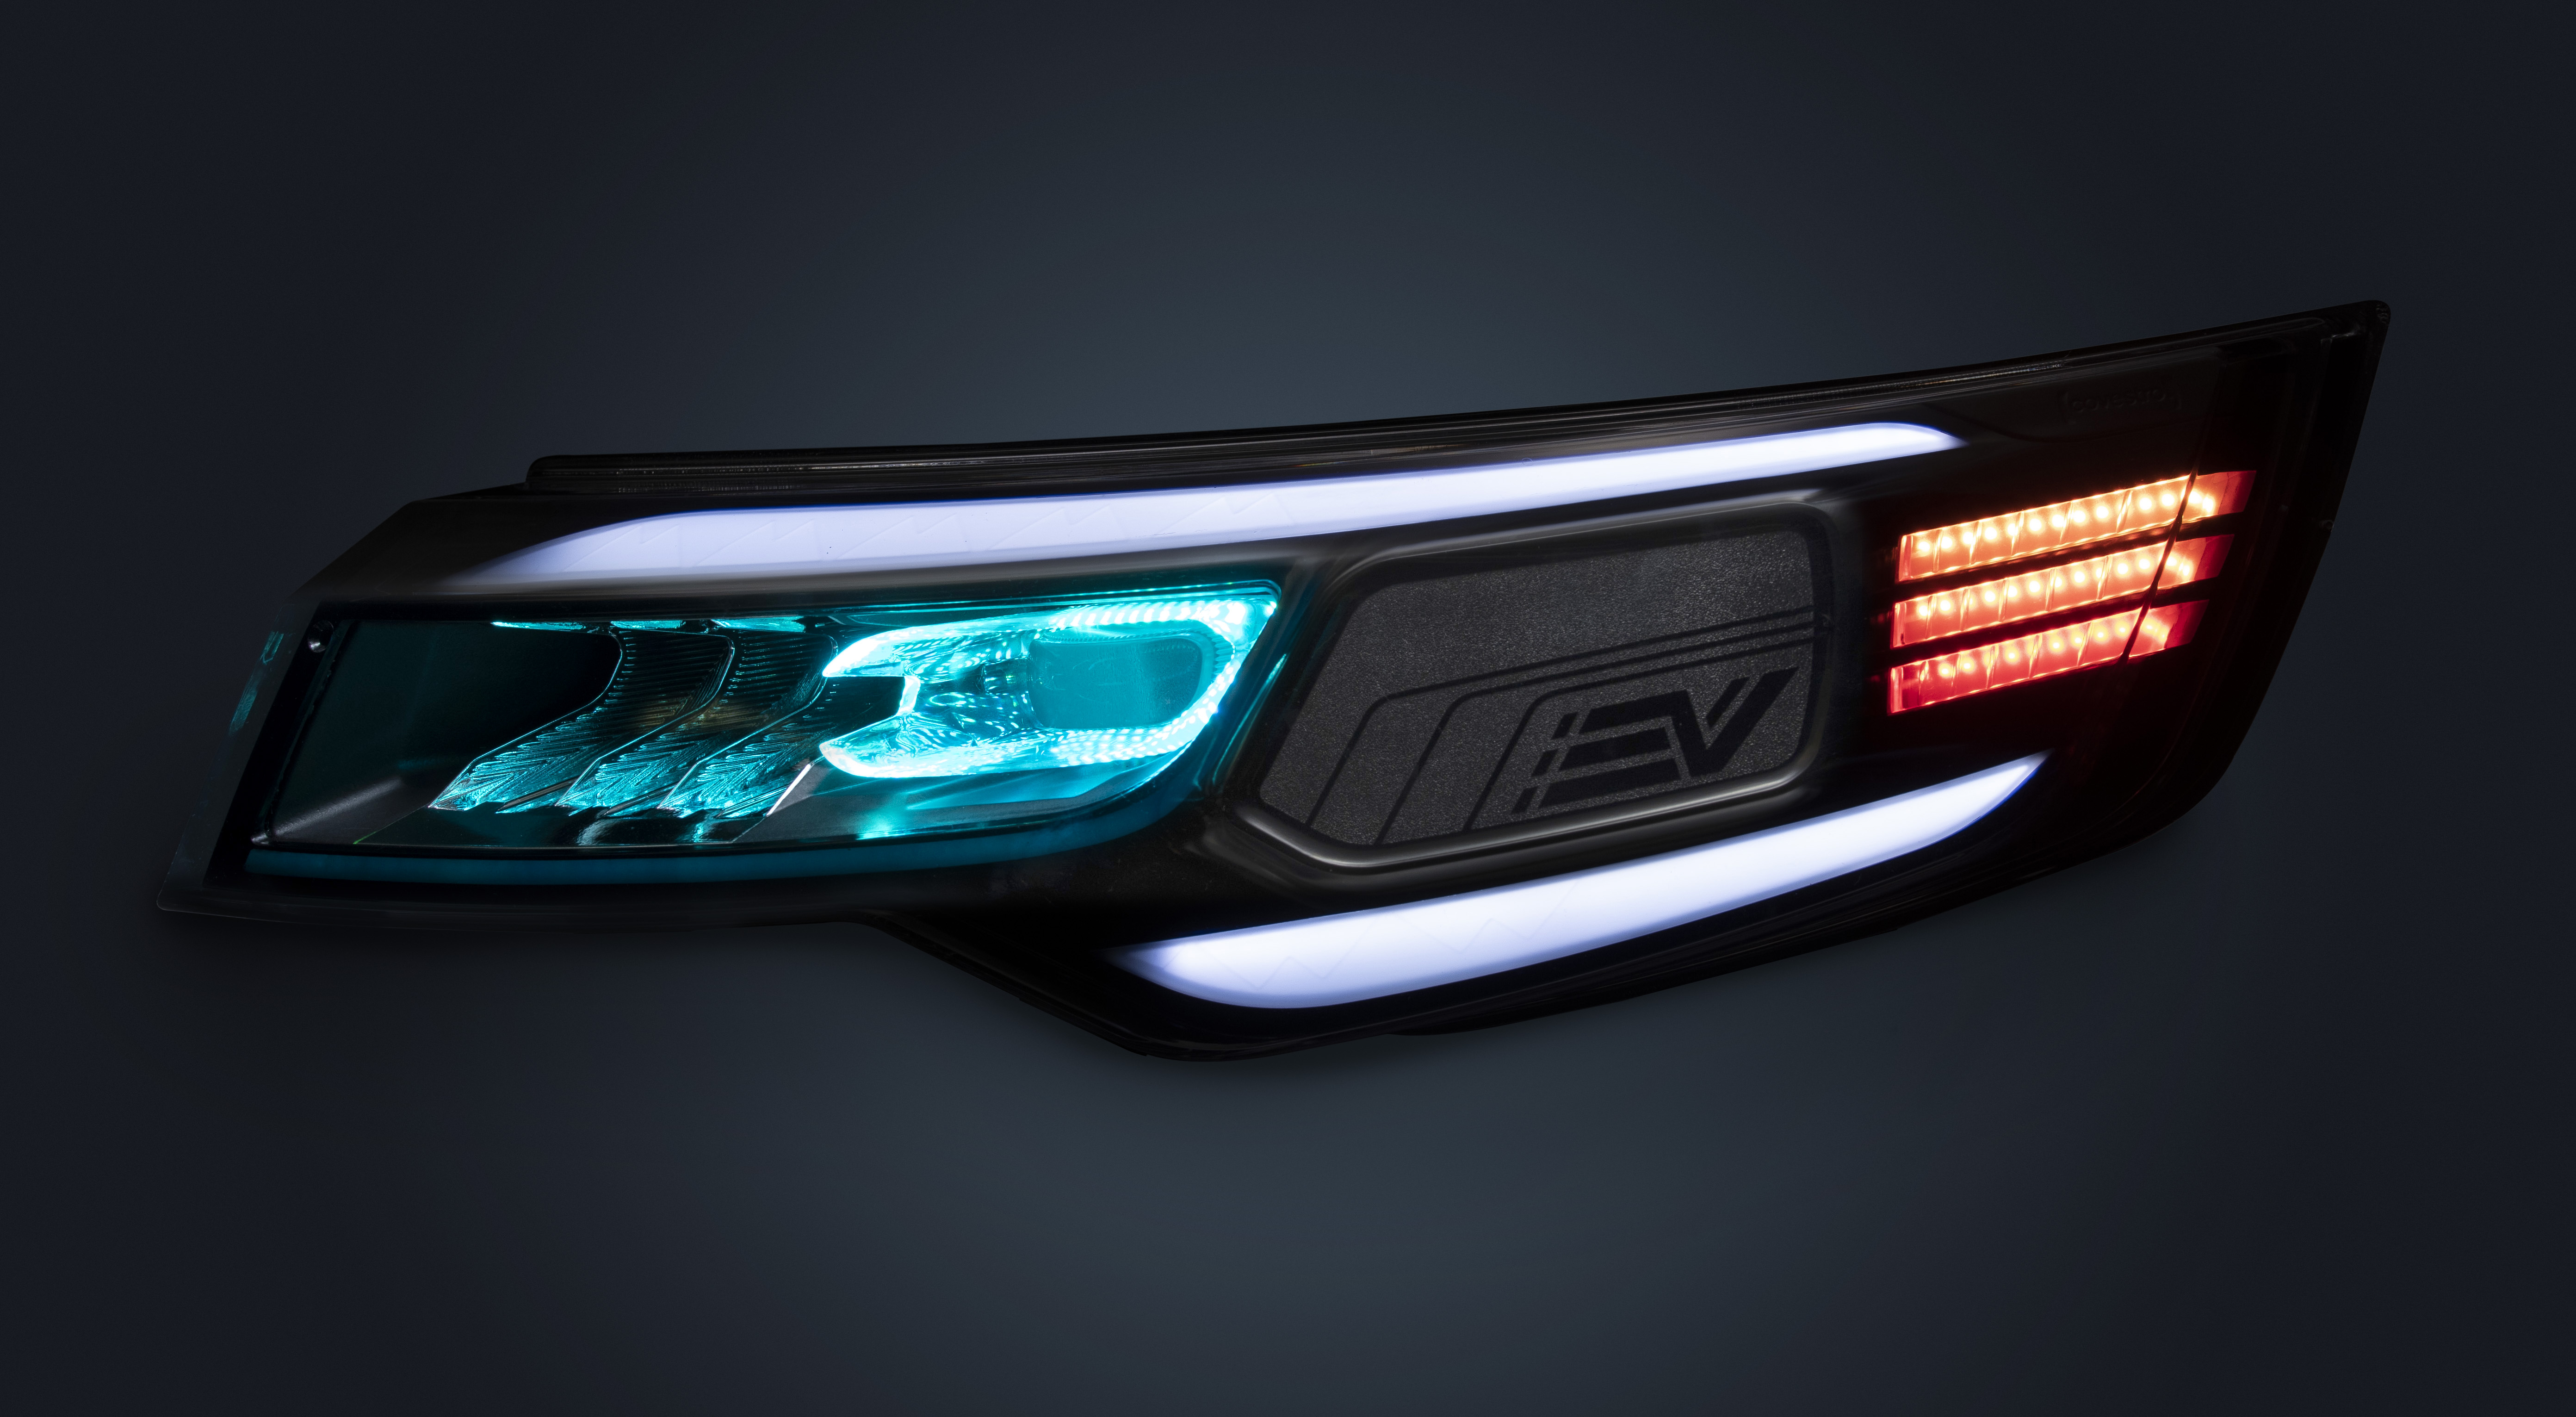 Recyclability designed into cutting-edge LED car headlamp concept